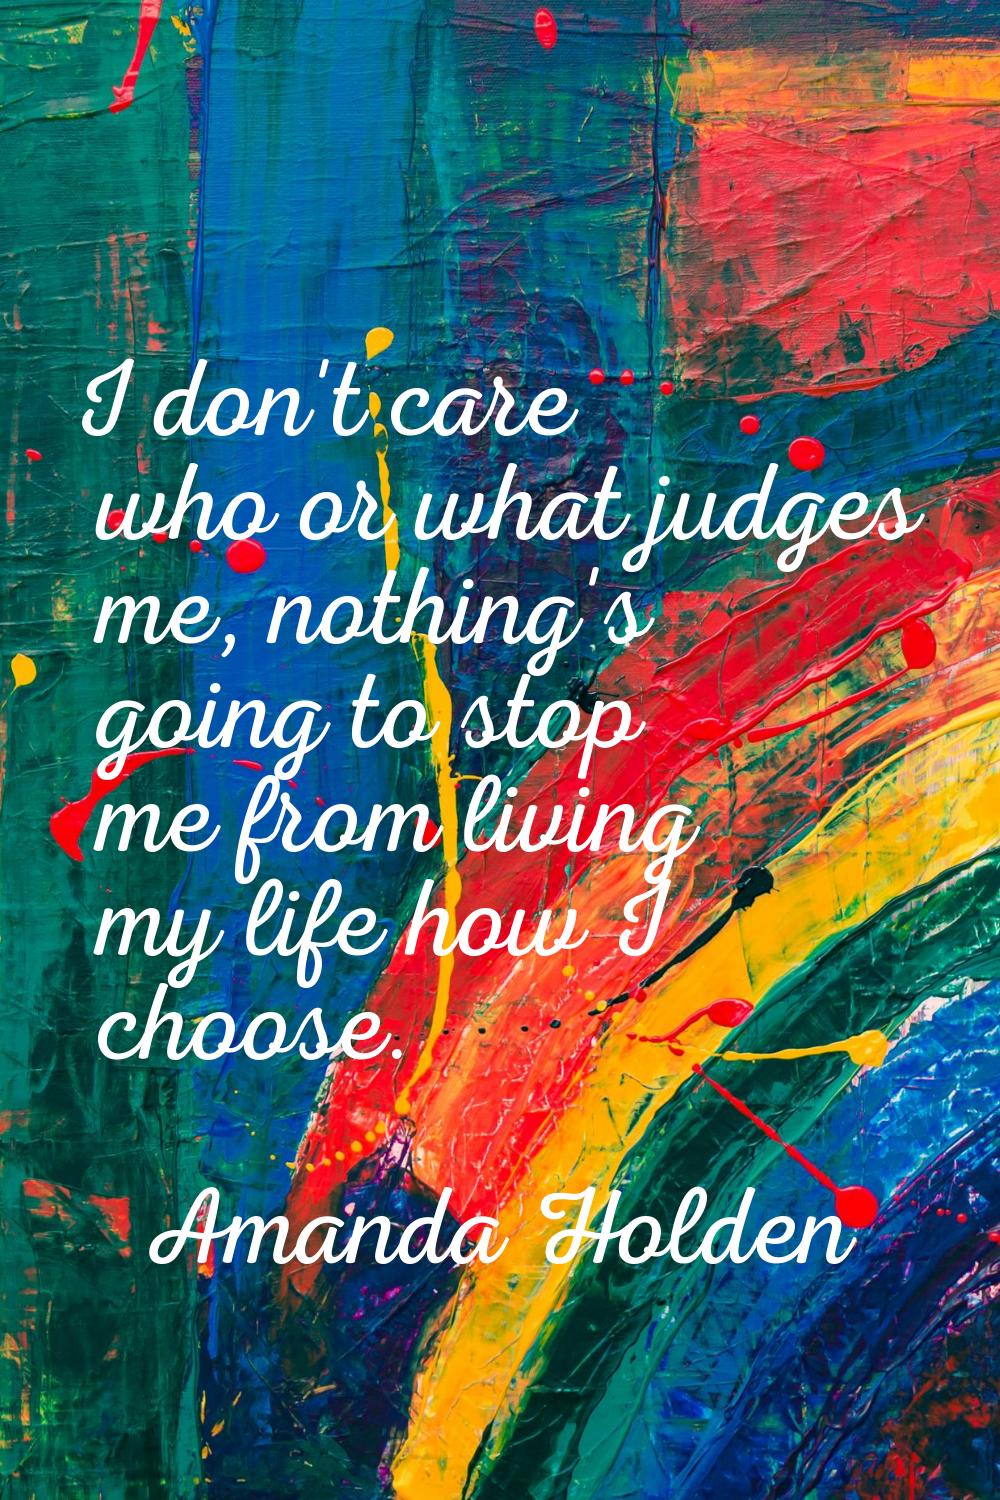 I don't care who or what judges me, nothing's going to stop me from living my life how I choose.